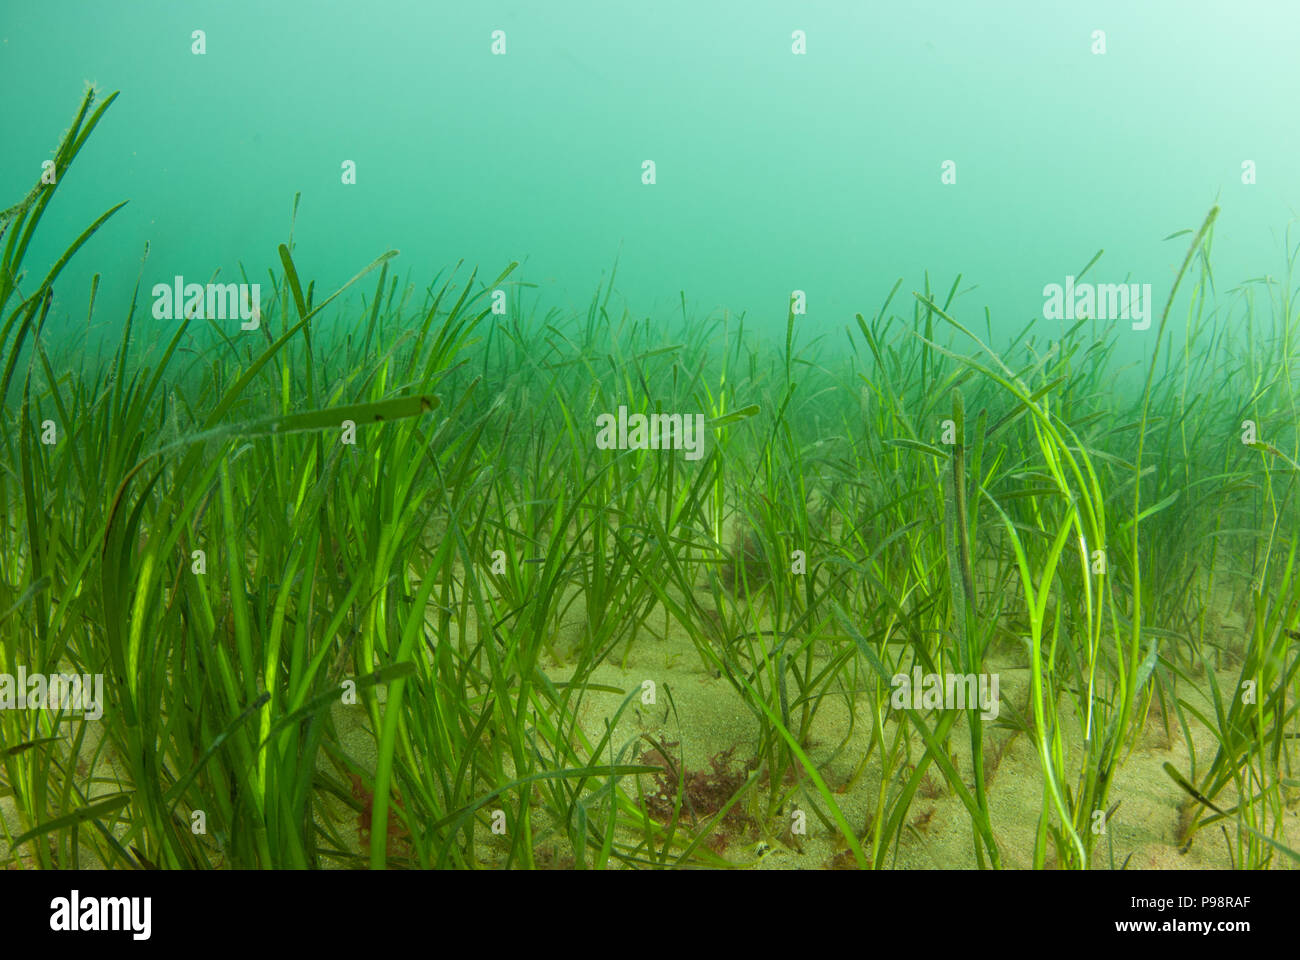 EELGRASS BEDS SWANAGE PURBECK Stock Photo